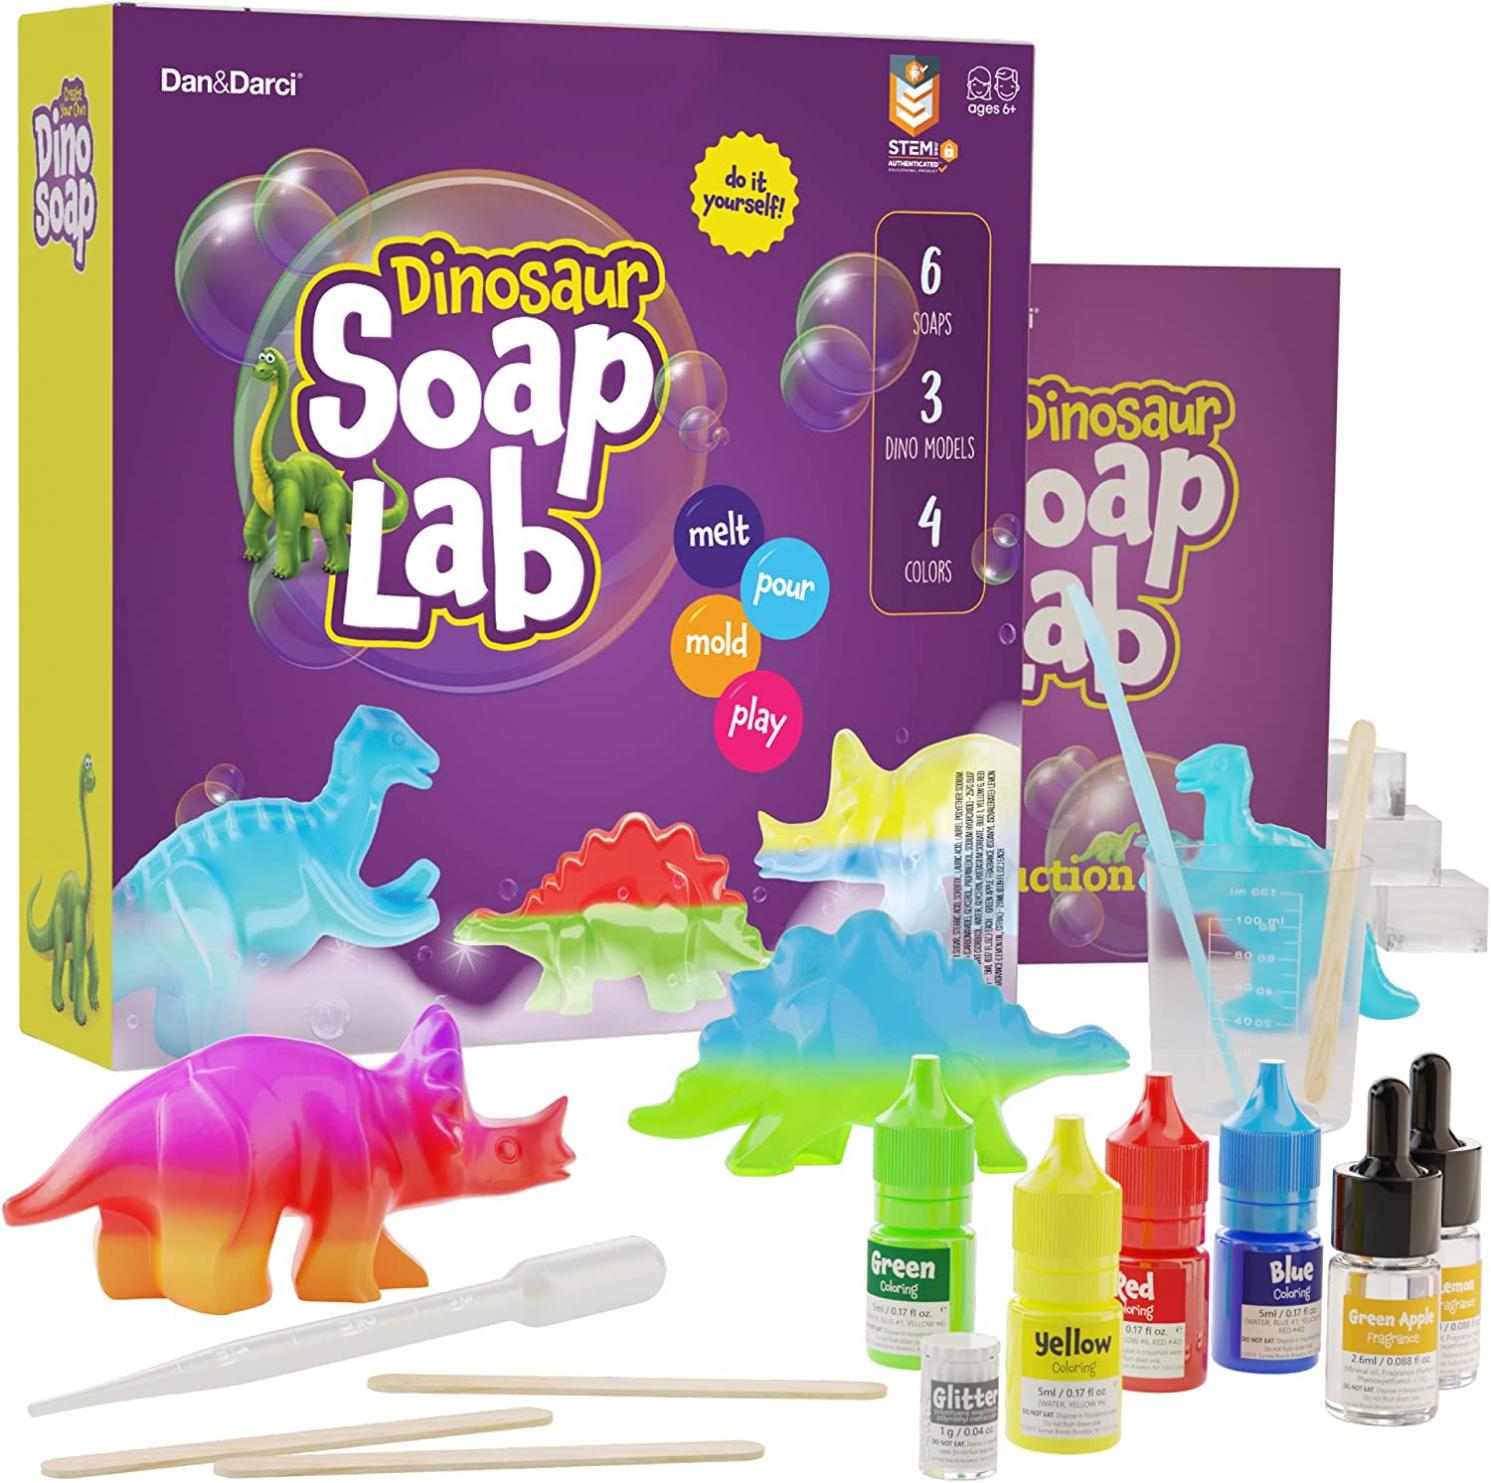 Dino Soap Making Kit for Kids - Dinosaur Science Kits for Kids All Ages - STEM DIY Activity Craft Kits - Crafts Gift for Girls and Boys